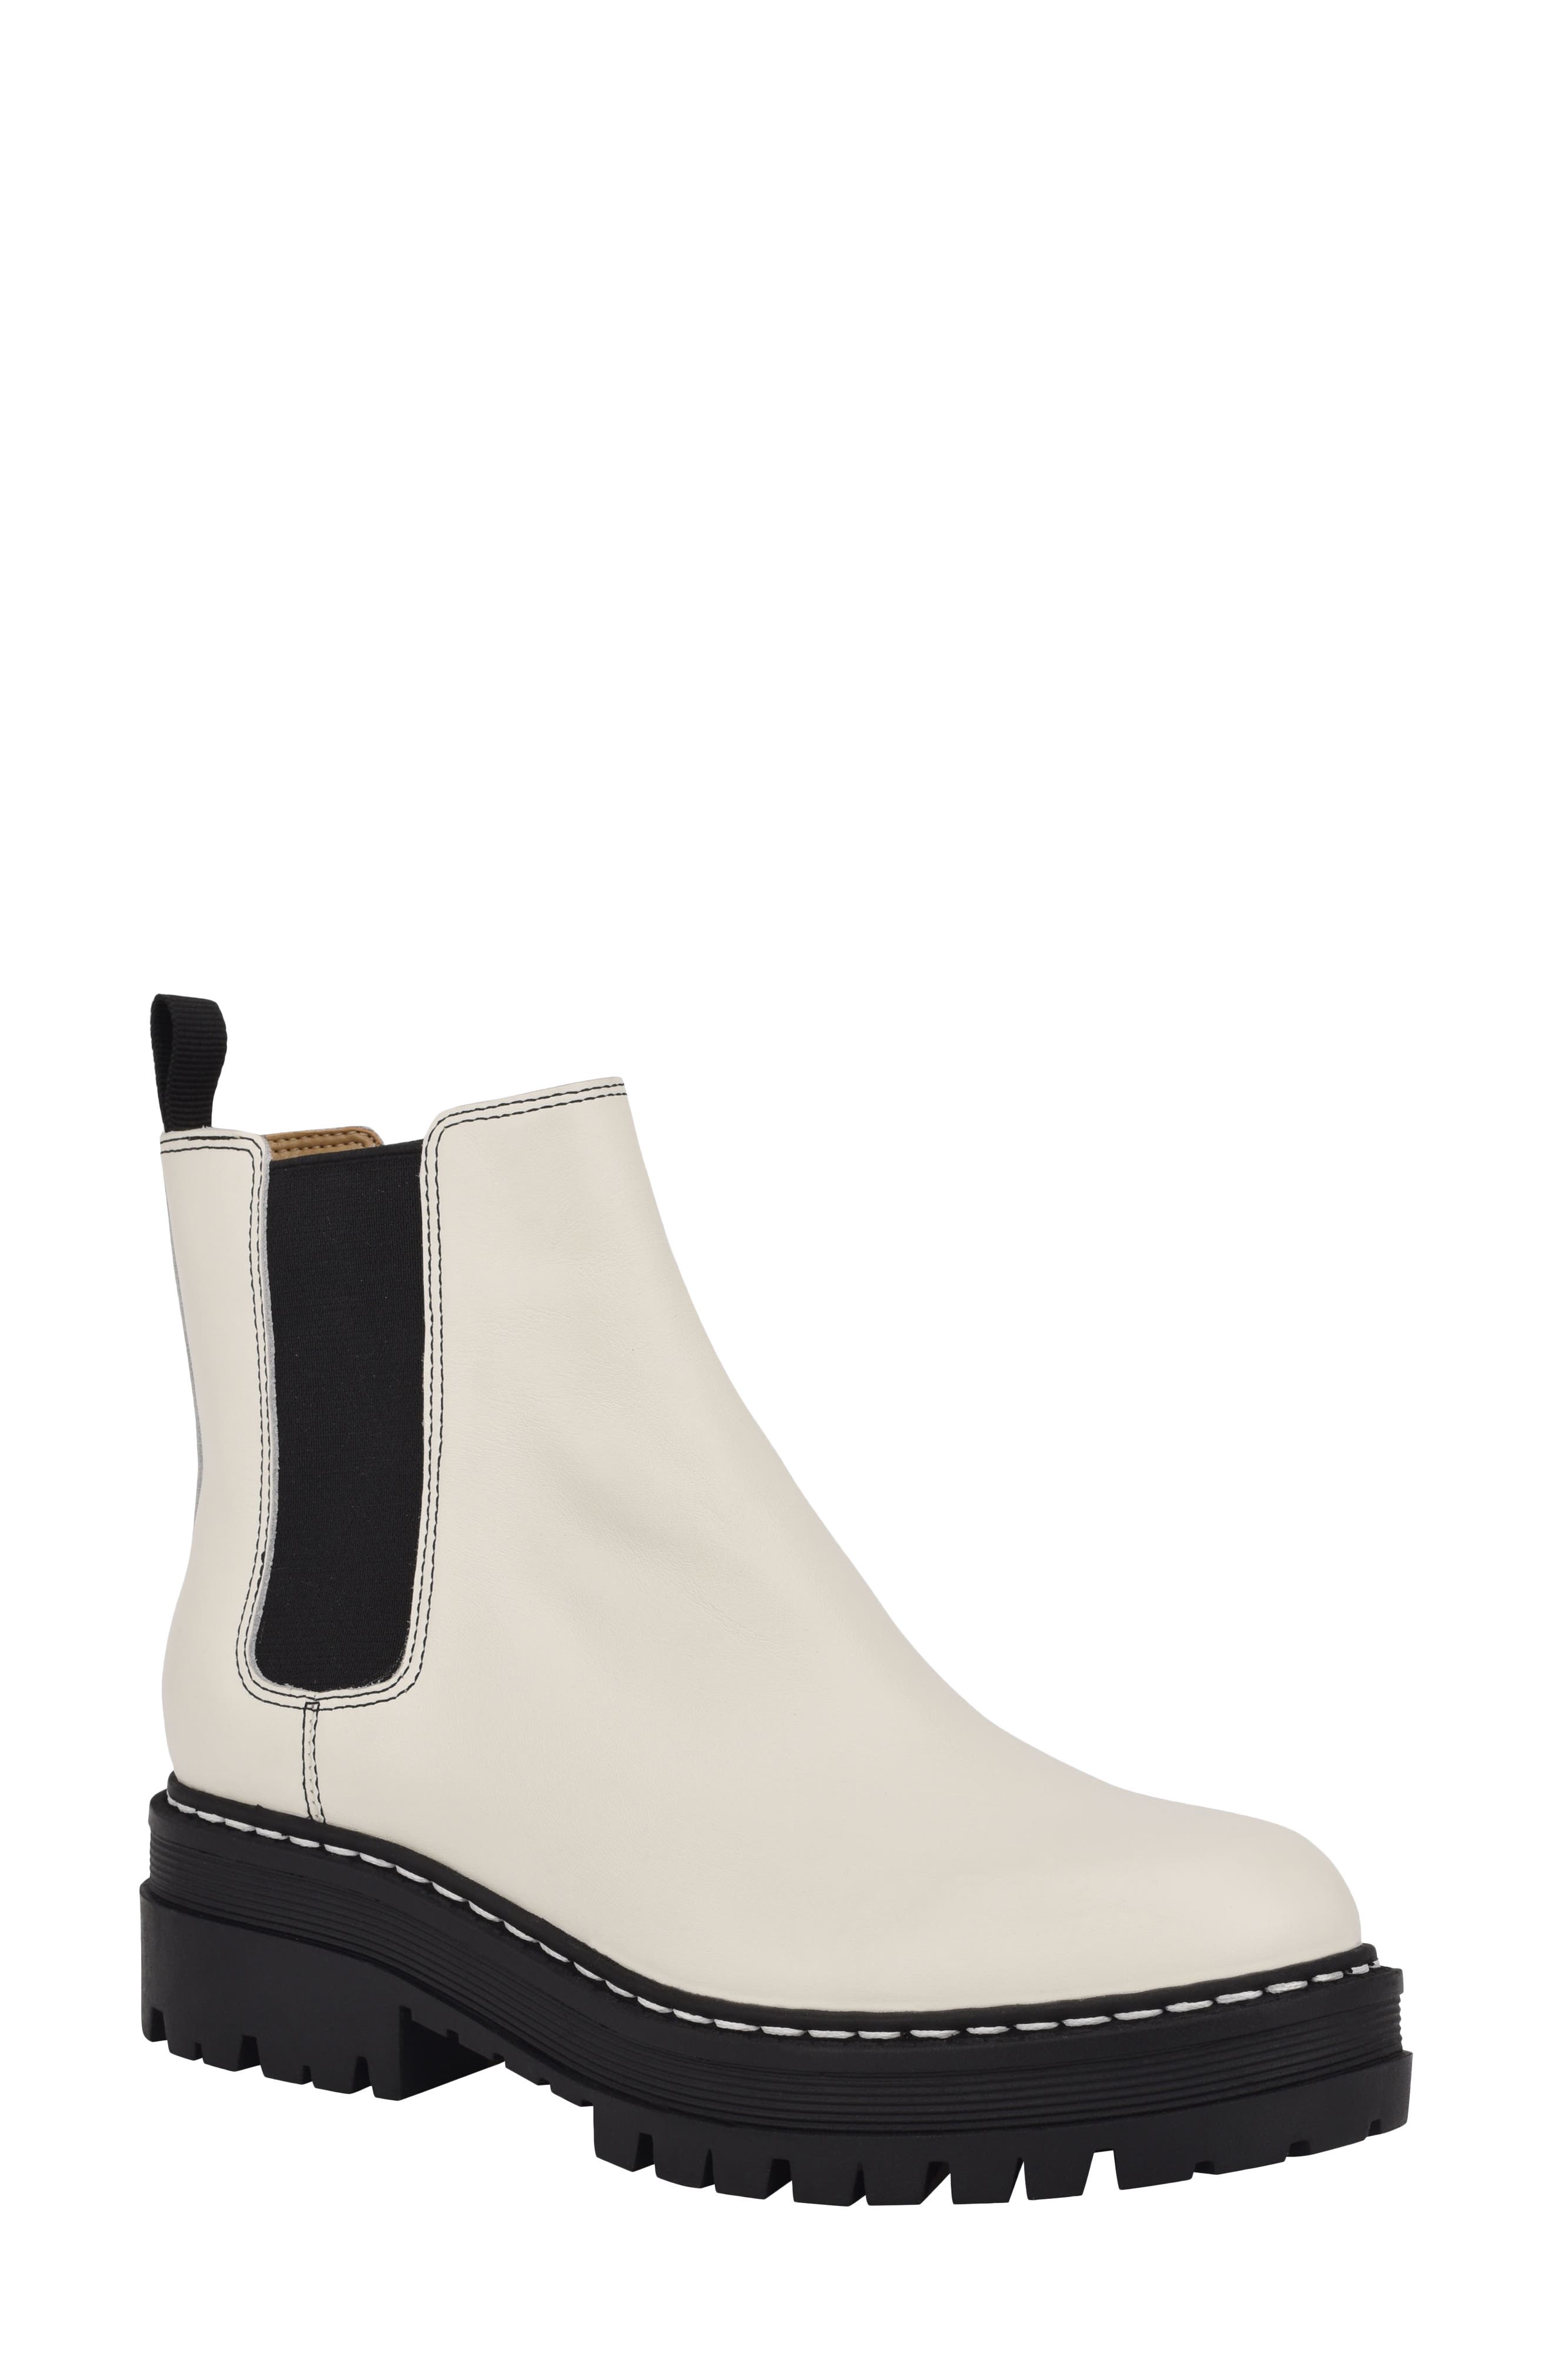 Marc Fisher Ltd Pirro Chelsea Boot In Chic Cream/ Black Leather